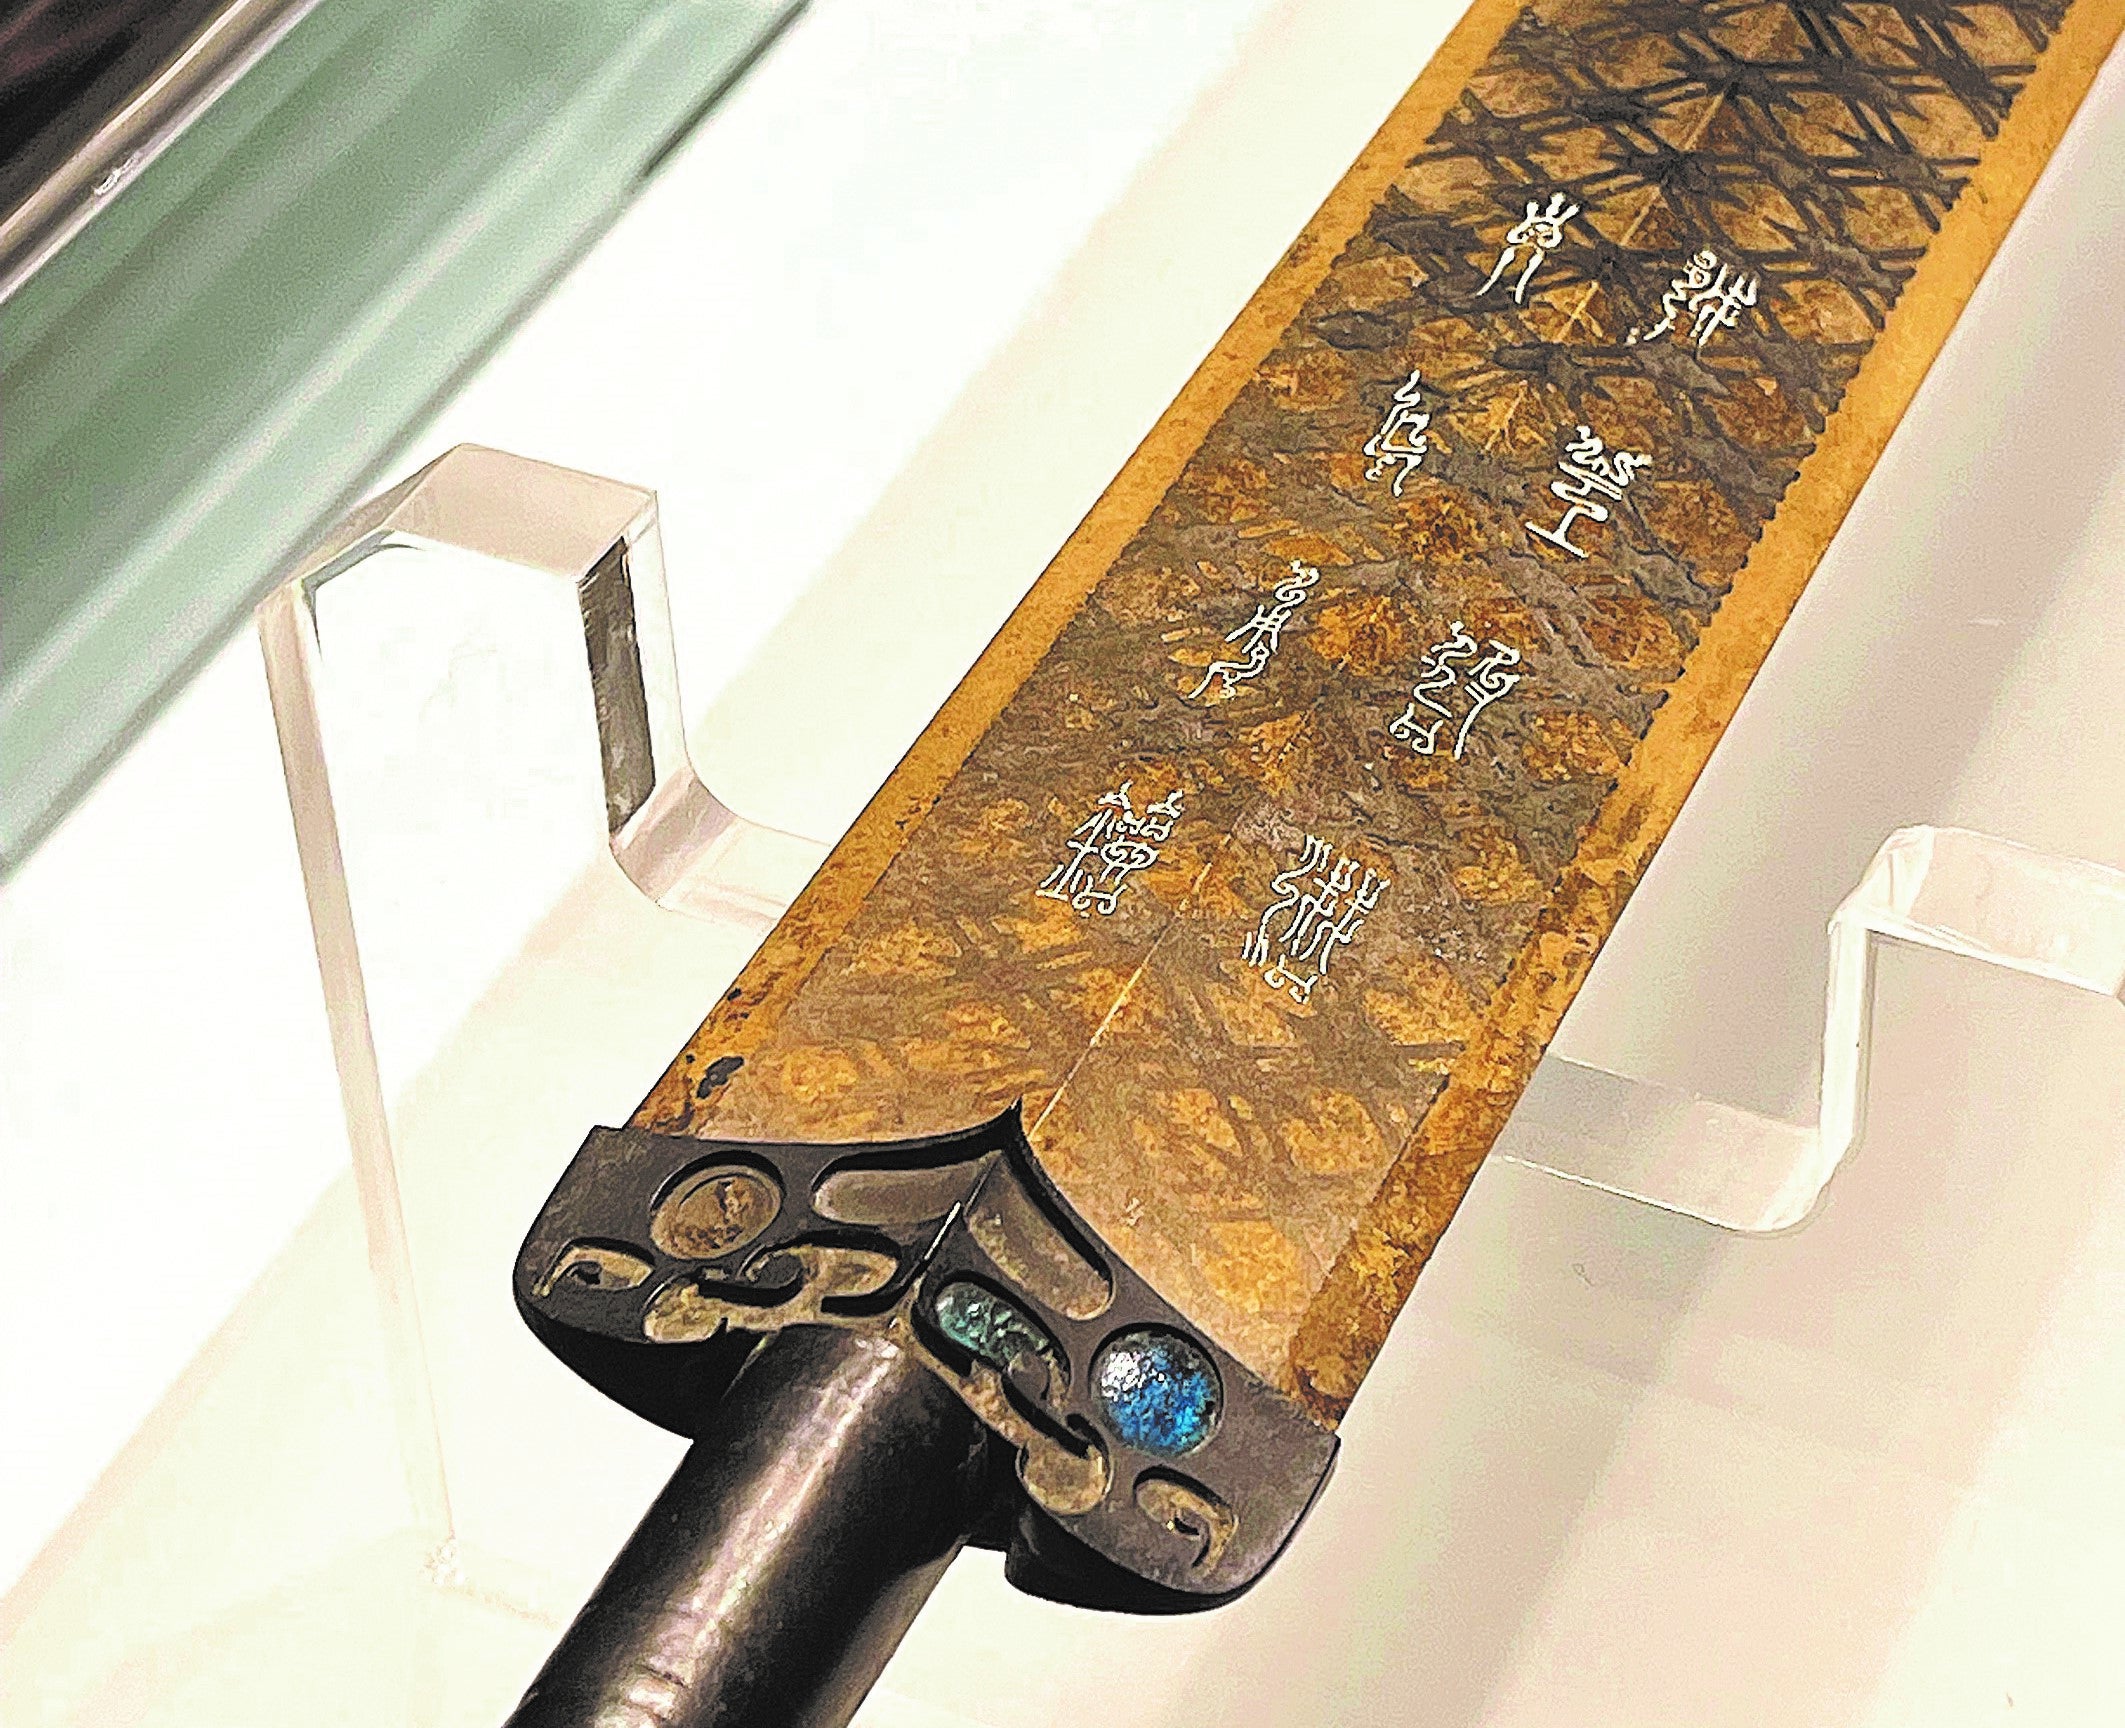 The sword on display at the Hubei Provincial Museum